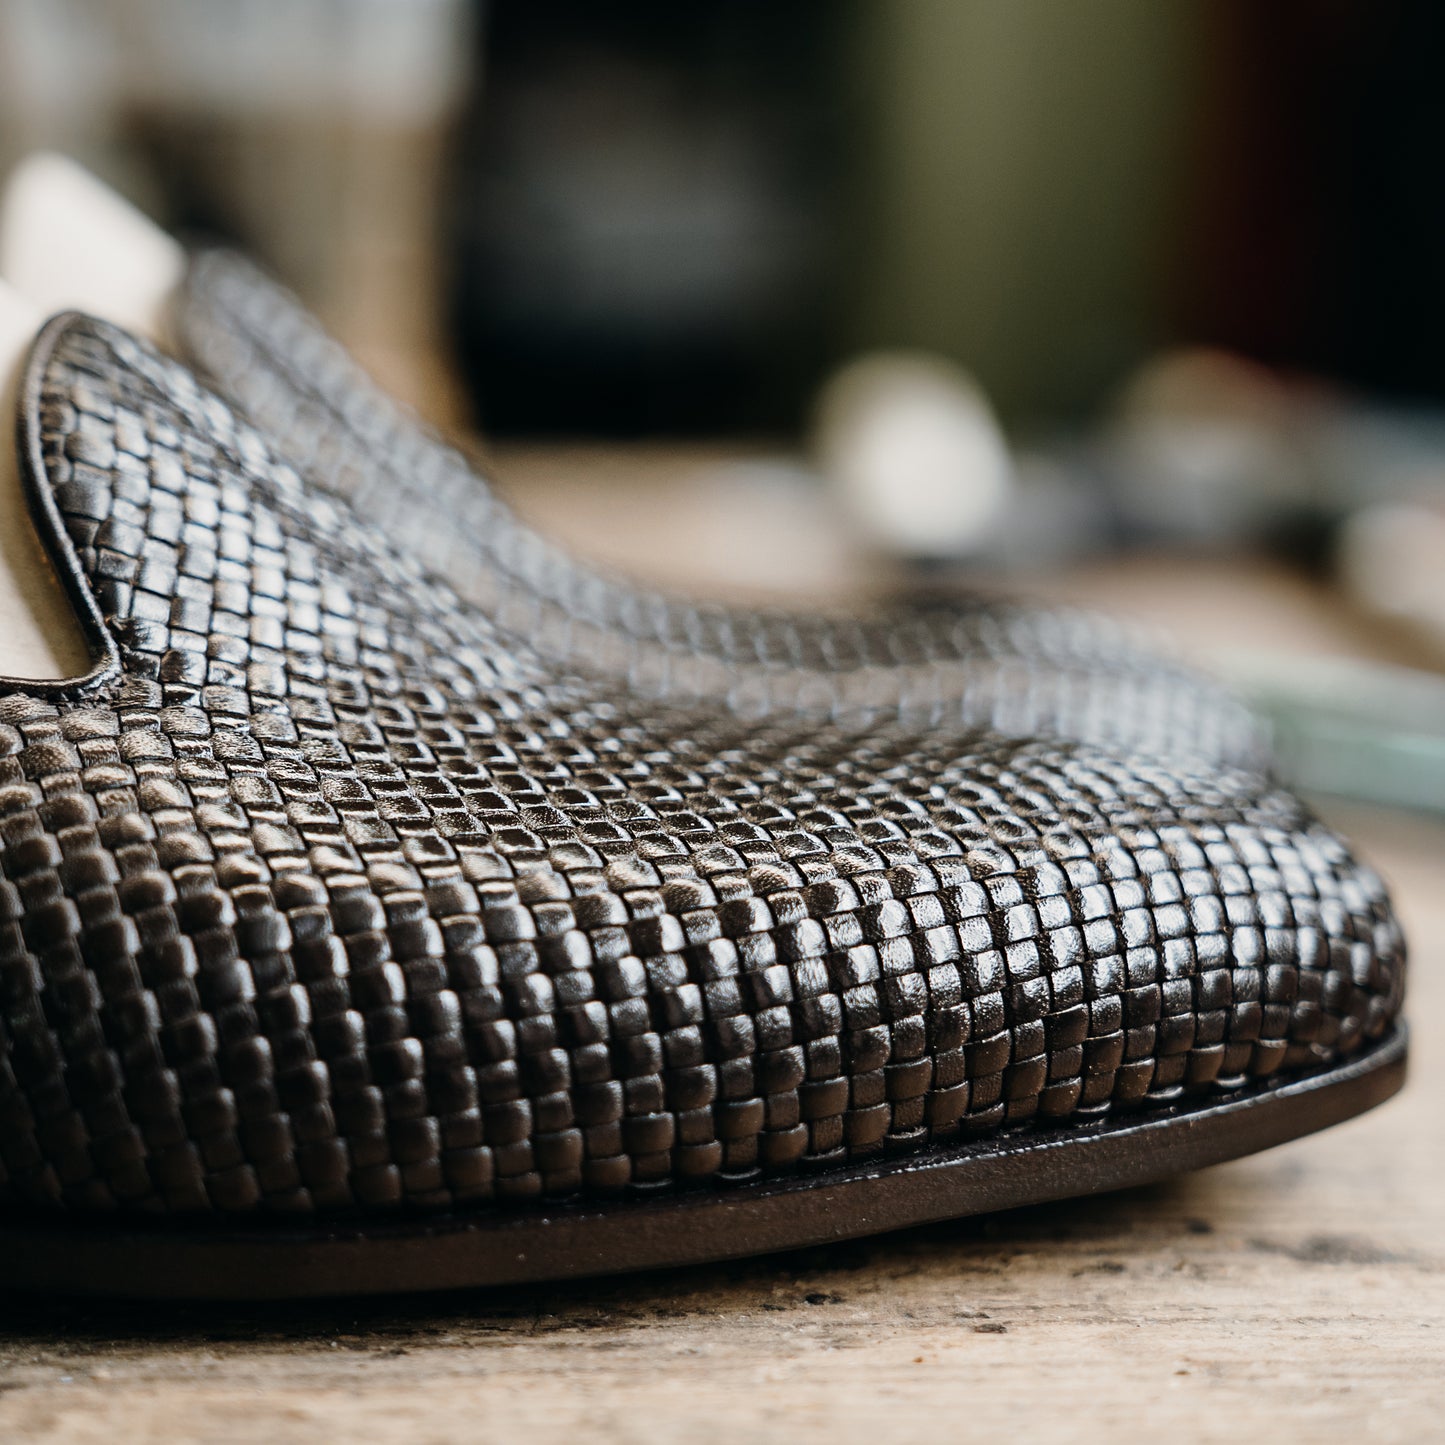 The Braided Leather Loafer